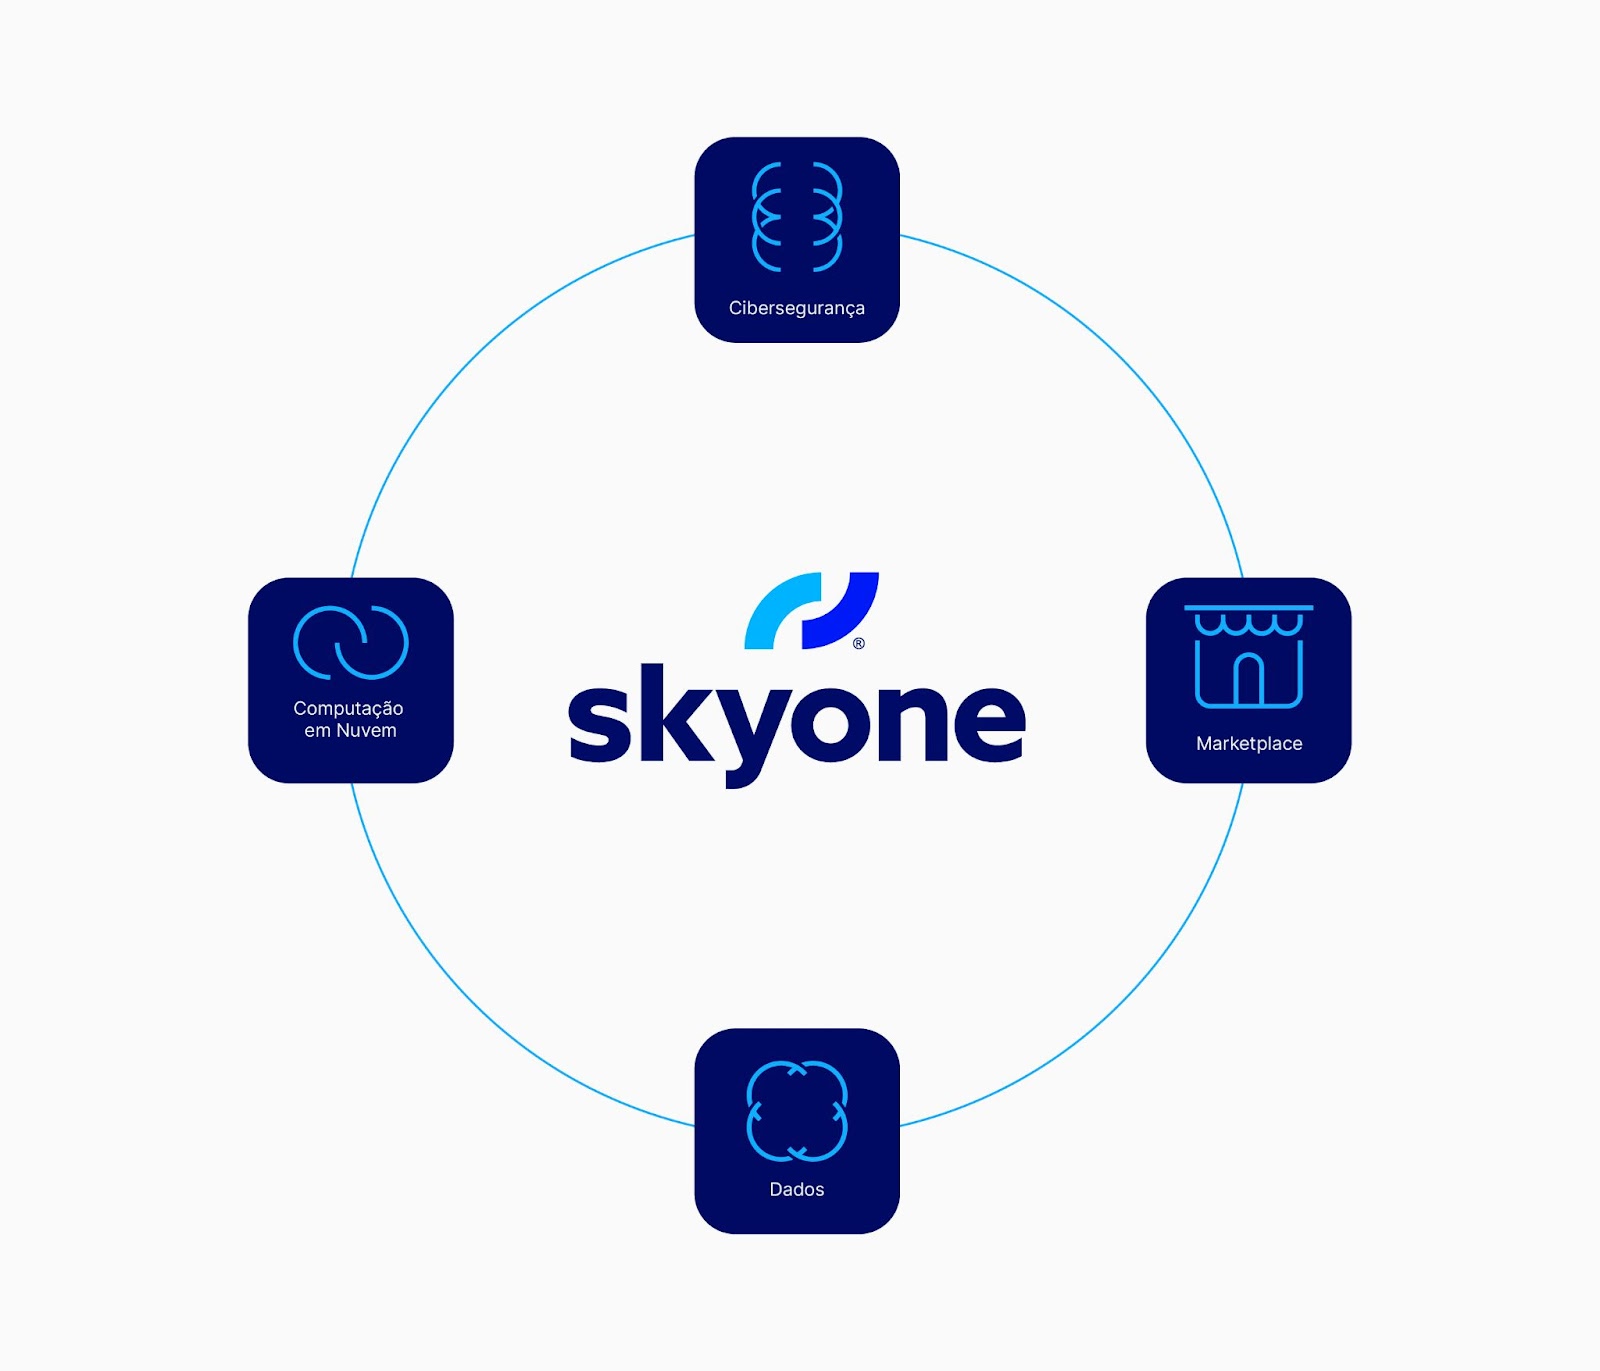 Image about How Skyone encourages resilience in its customers&#39; businesses